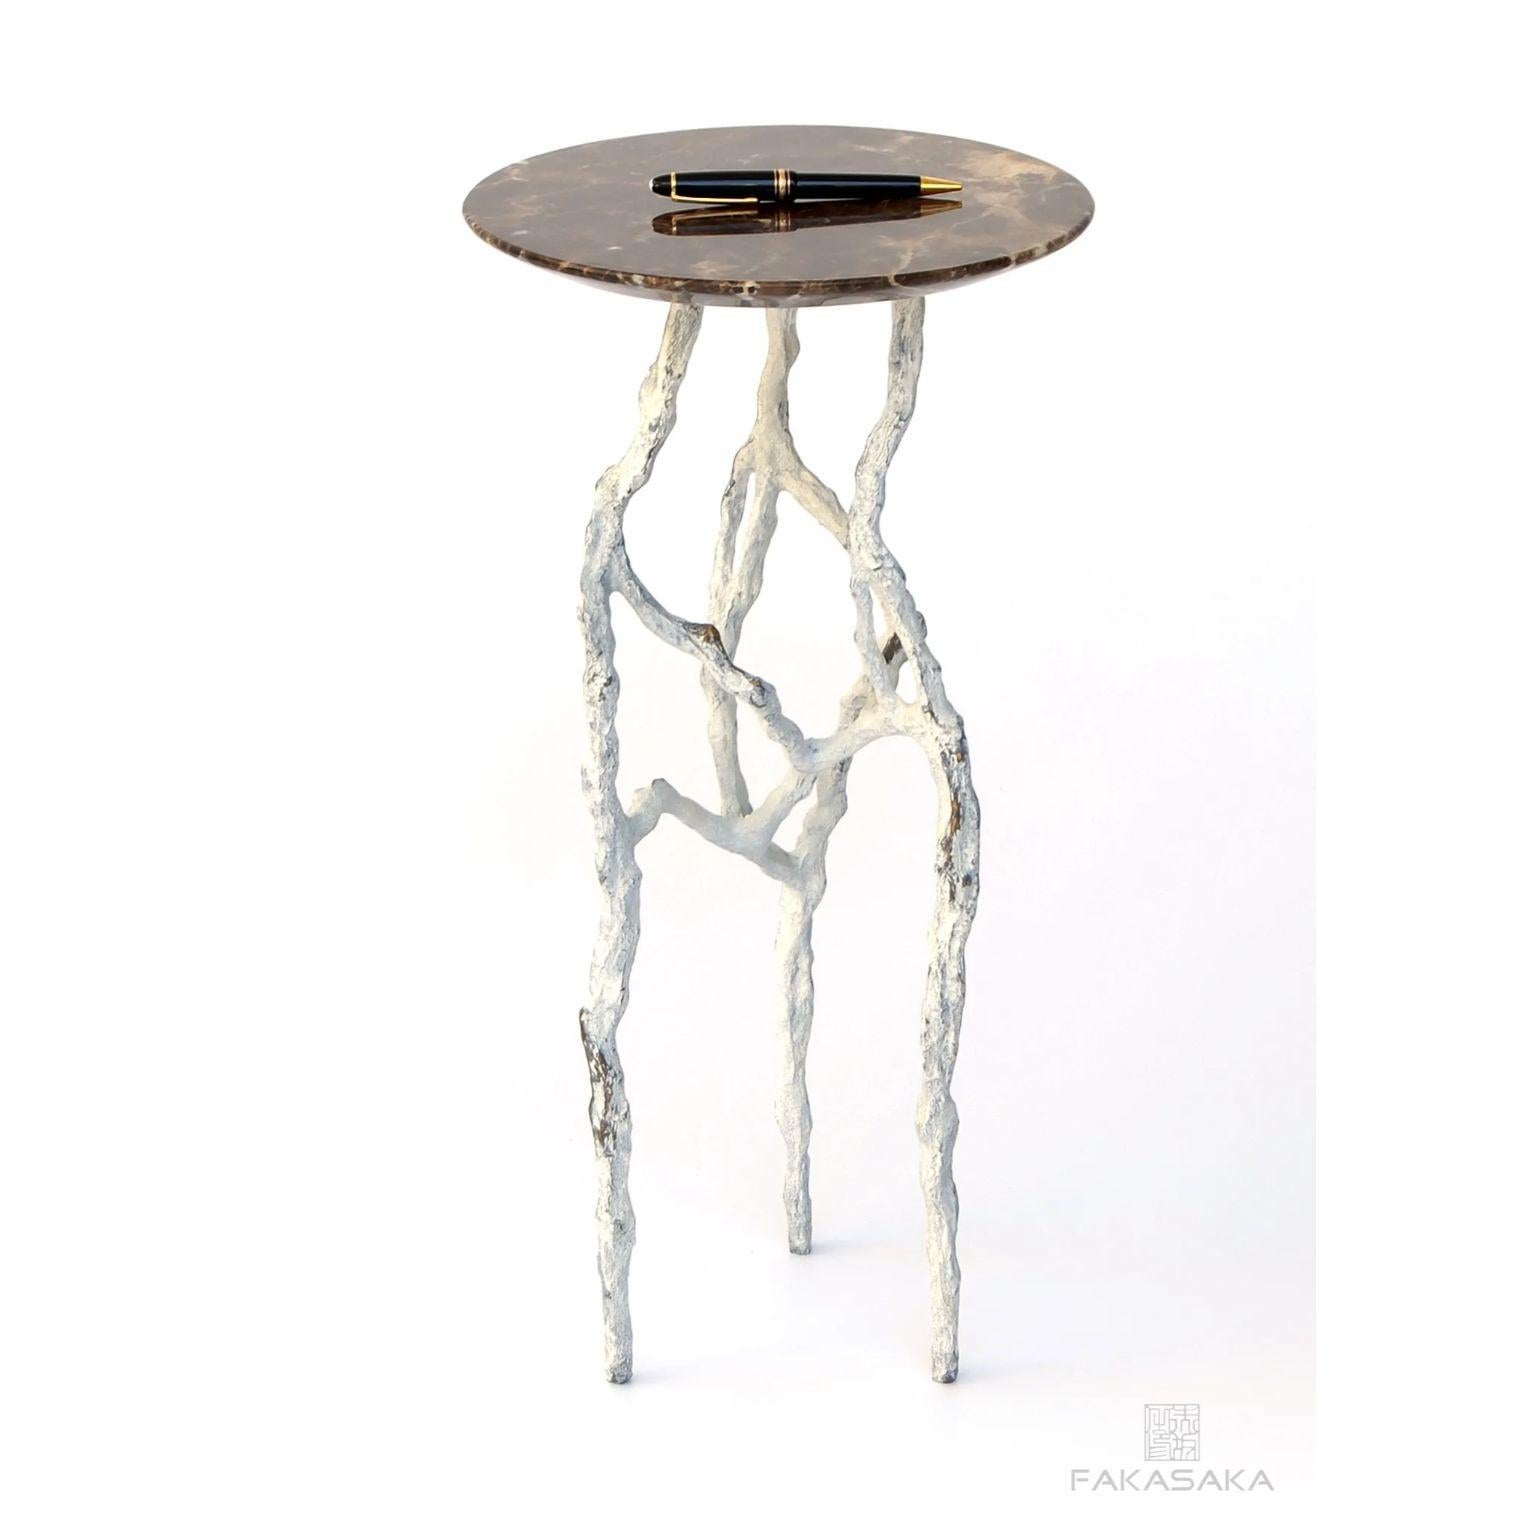 Other Alexia 3 Drink Table with Marrom Imperial Marble Top by Fakasaka Design For Sale